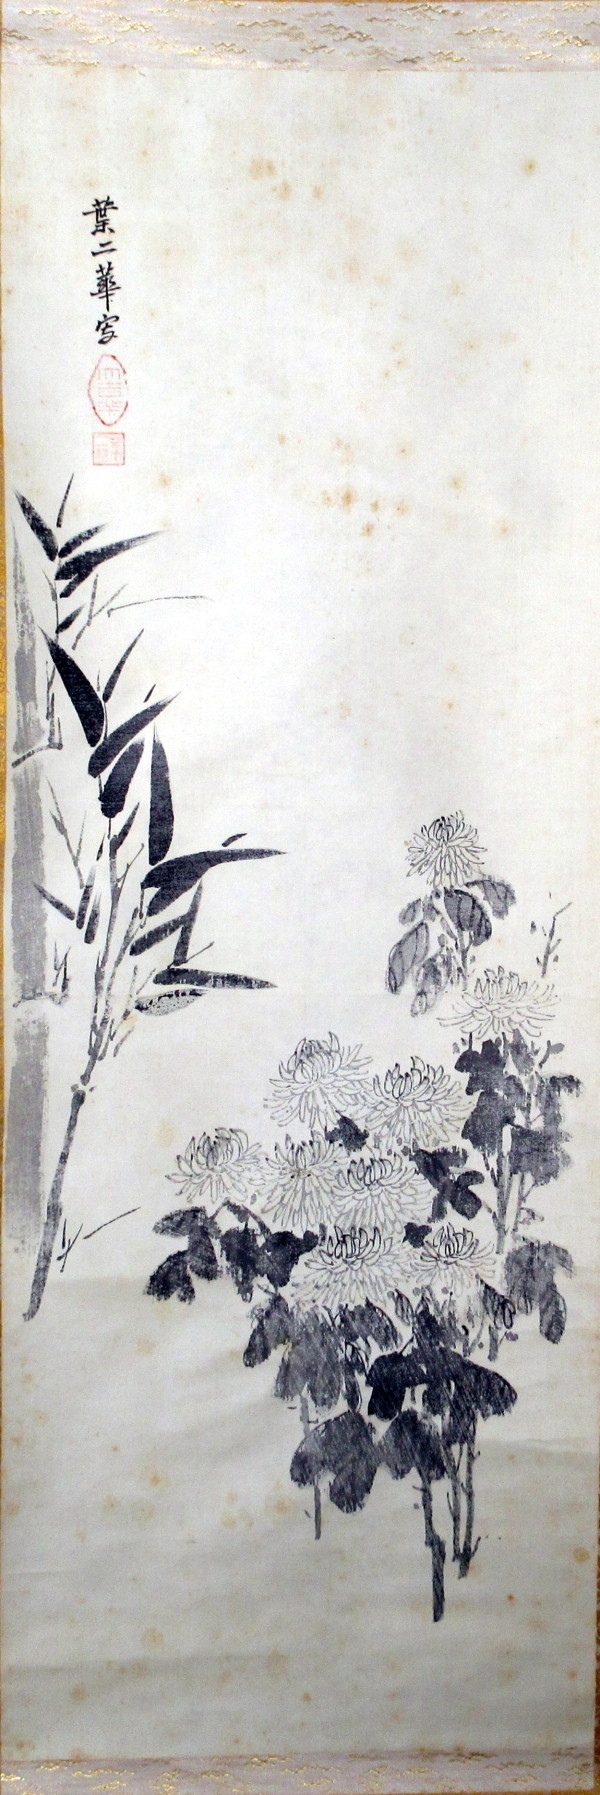 Bamboo and Chysanthemum by Yee Wah Jung